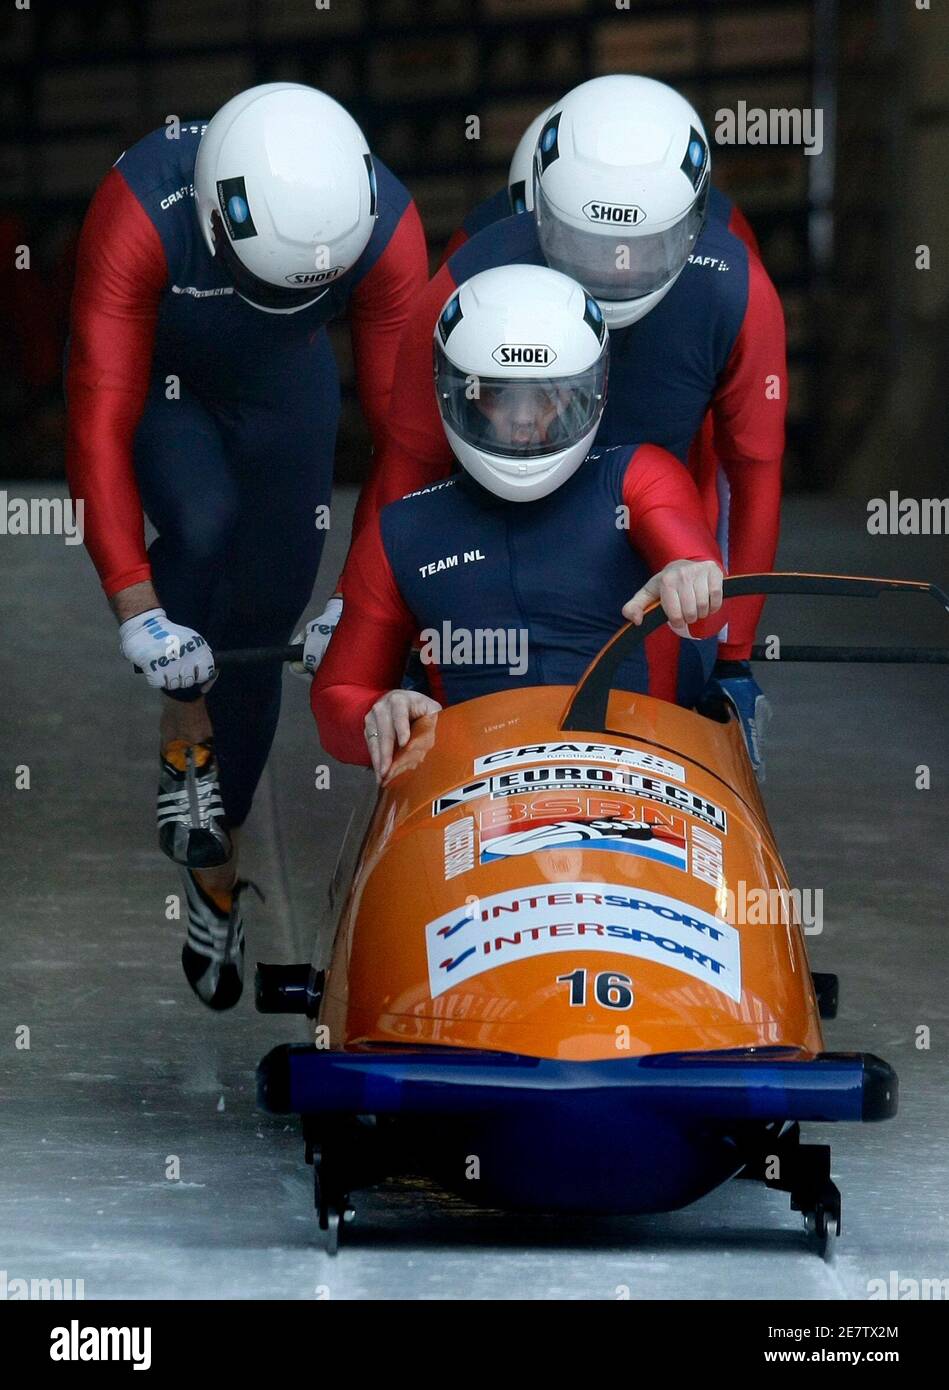 Team Netherland 1 with Edwin van Calker (front), Arnold van Calker, Sybren Jansma and Arno Klaasen push the bob during the start at the first run of the men's Bobsleigh World Cup race in the southern Bavarian resort of Koenigssee January 11, 2009. Team Germany 2 with Karl Angerer, Andreas Udvari, Alex Mann and Gregor Bermbach won the race ahead of Team Netherland 1 and two third places with Germany 1 with Andre Lange, Rene Hoppe, Alexander Roediger and Martin Putze and Team Latvia 1 with Janis Minins, Daumants Dreiskens, Oskars Melbardis and Intars Dambis.    REUTERS/Michaela Rehle (GERMANY) Stock Photo